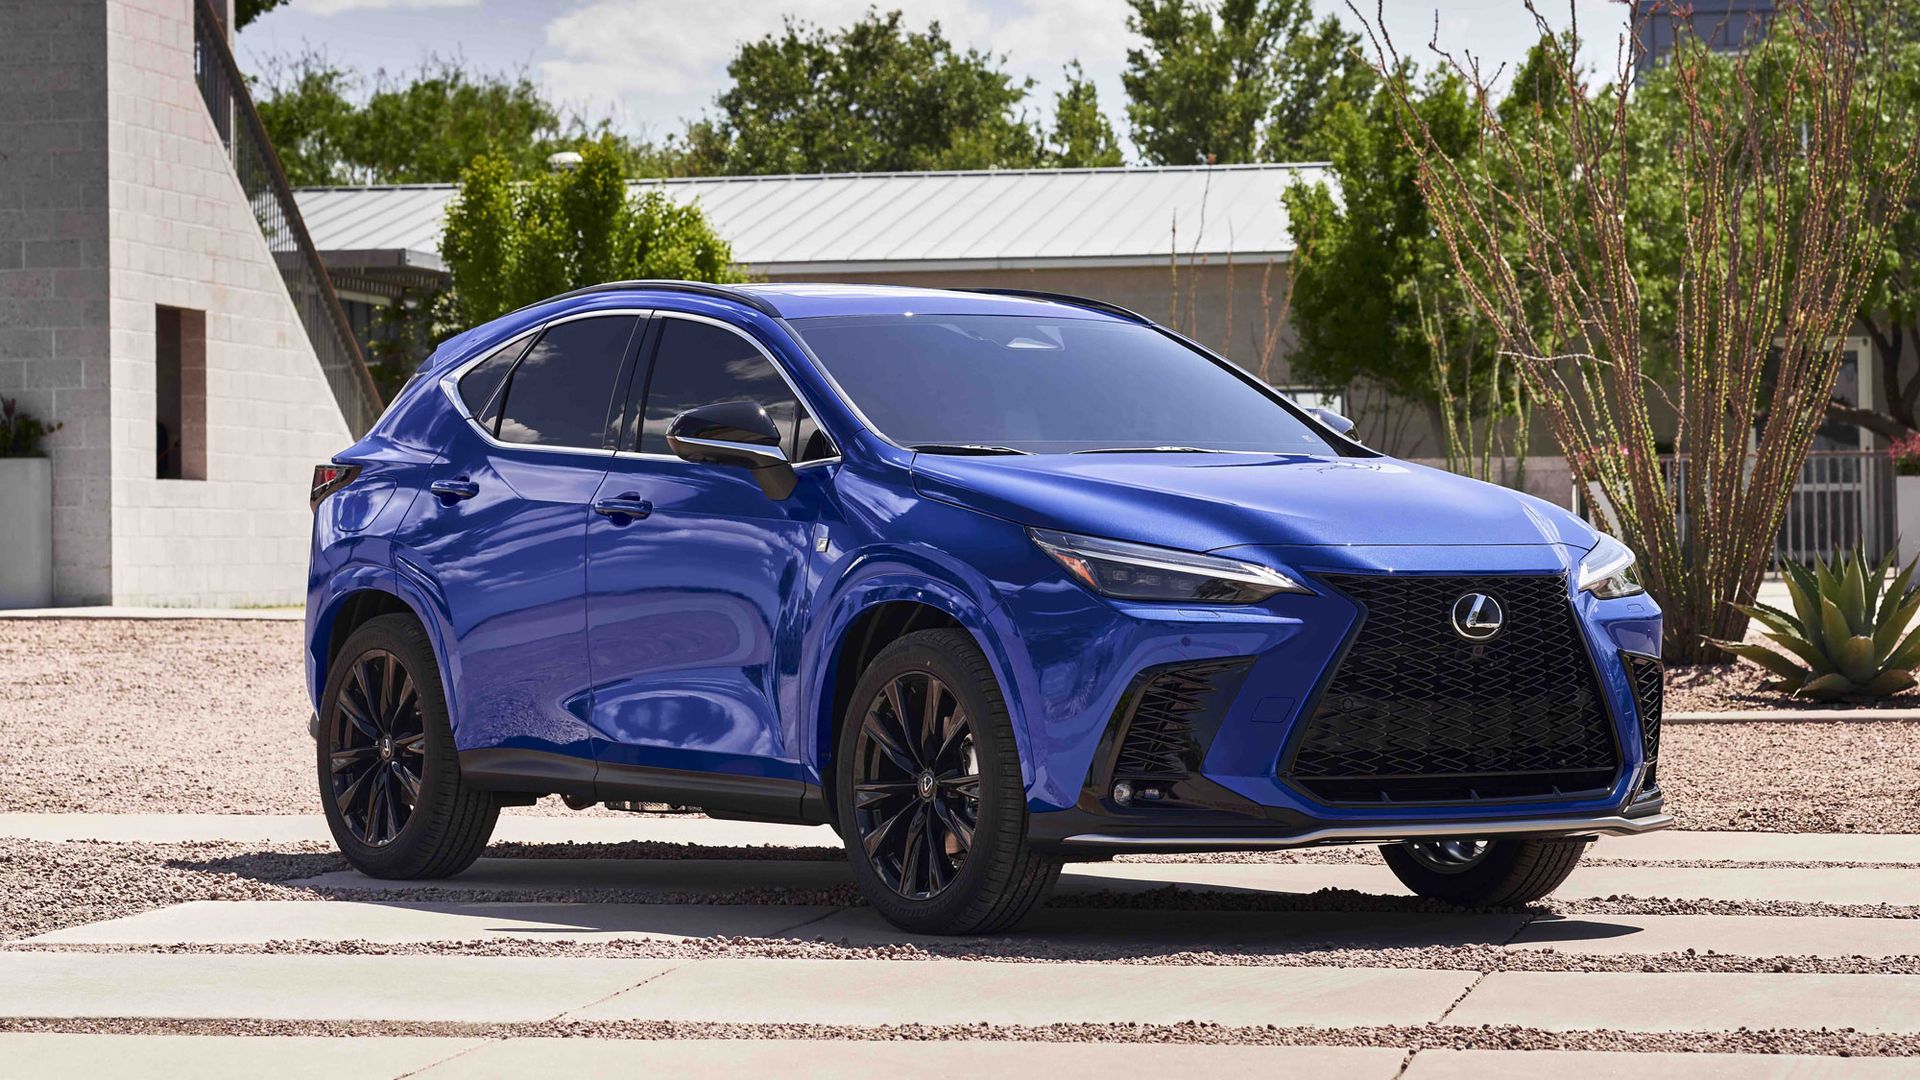 The New Lexus Nx Has Two Features Thats Got Us Saying Finally Techradar 3982